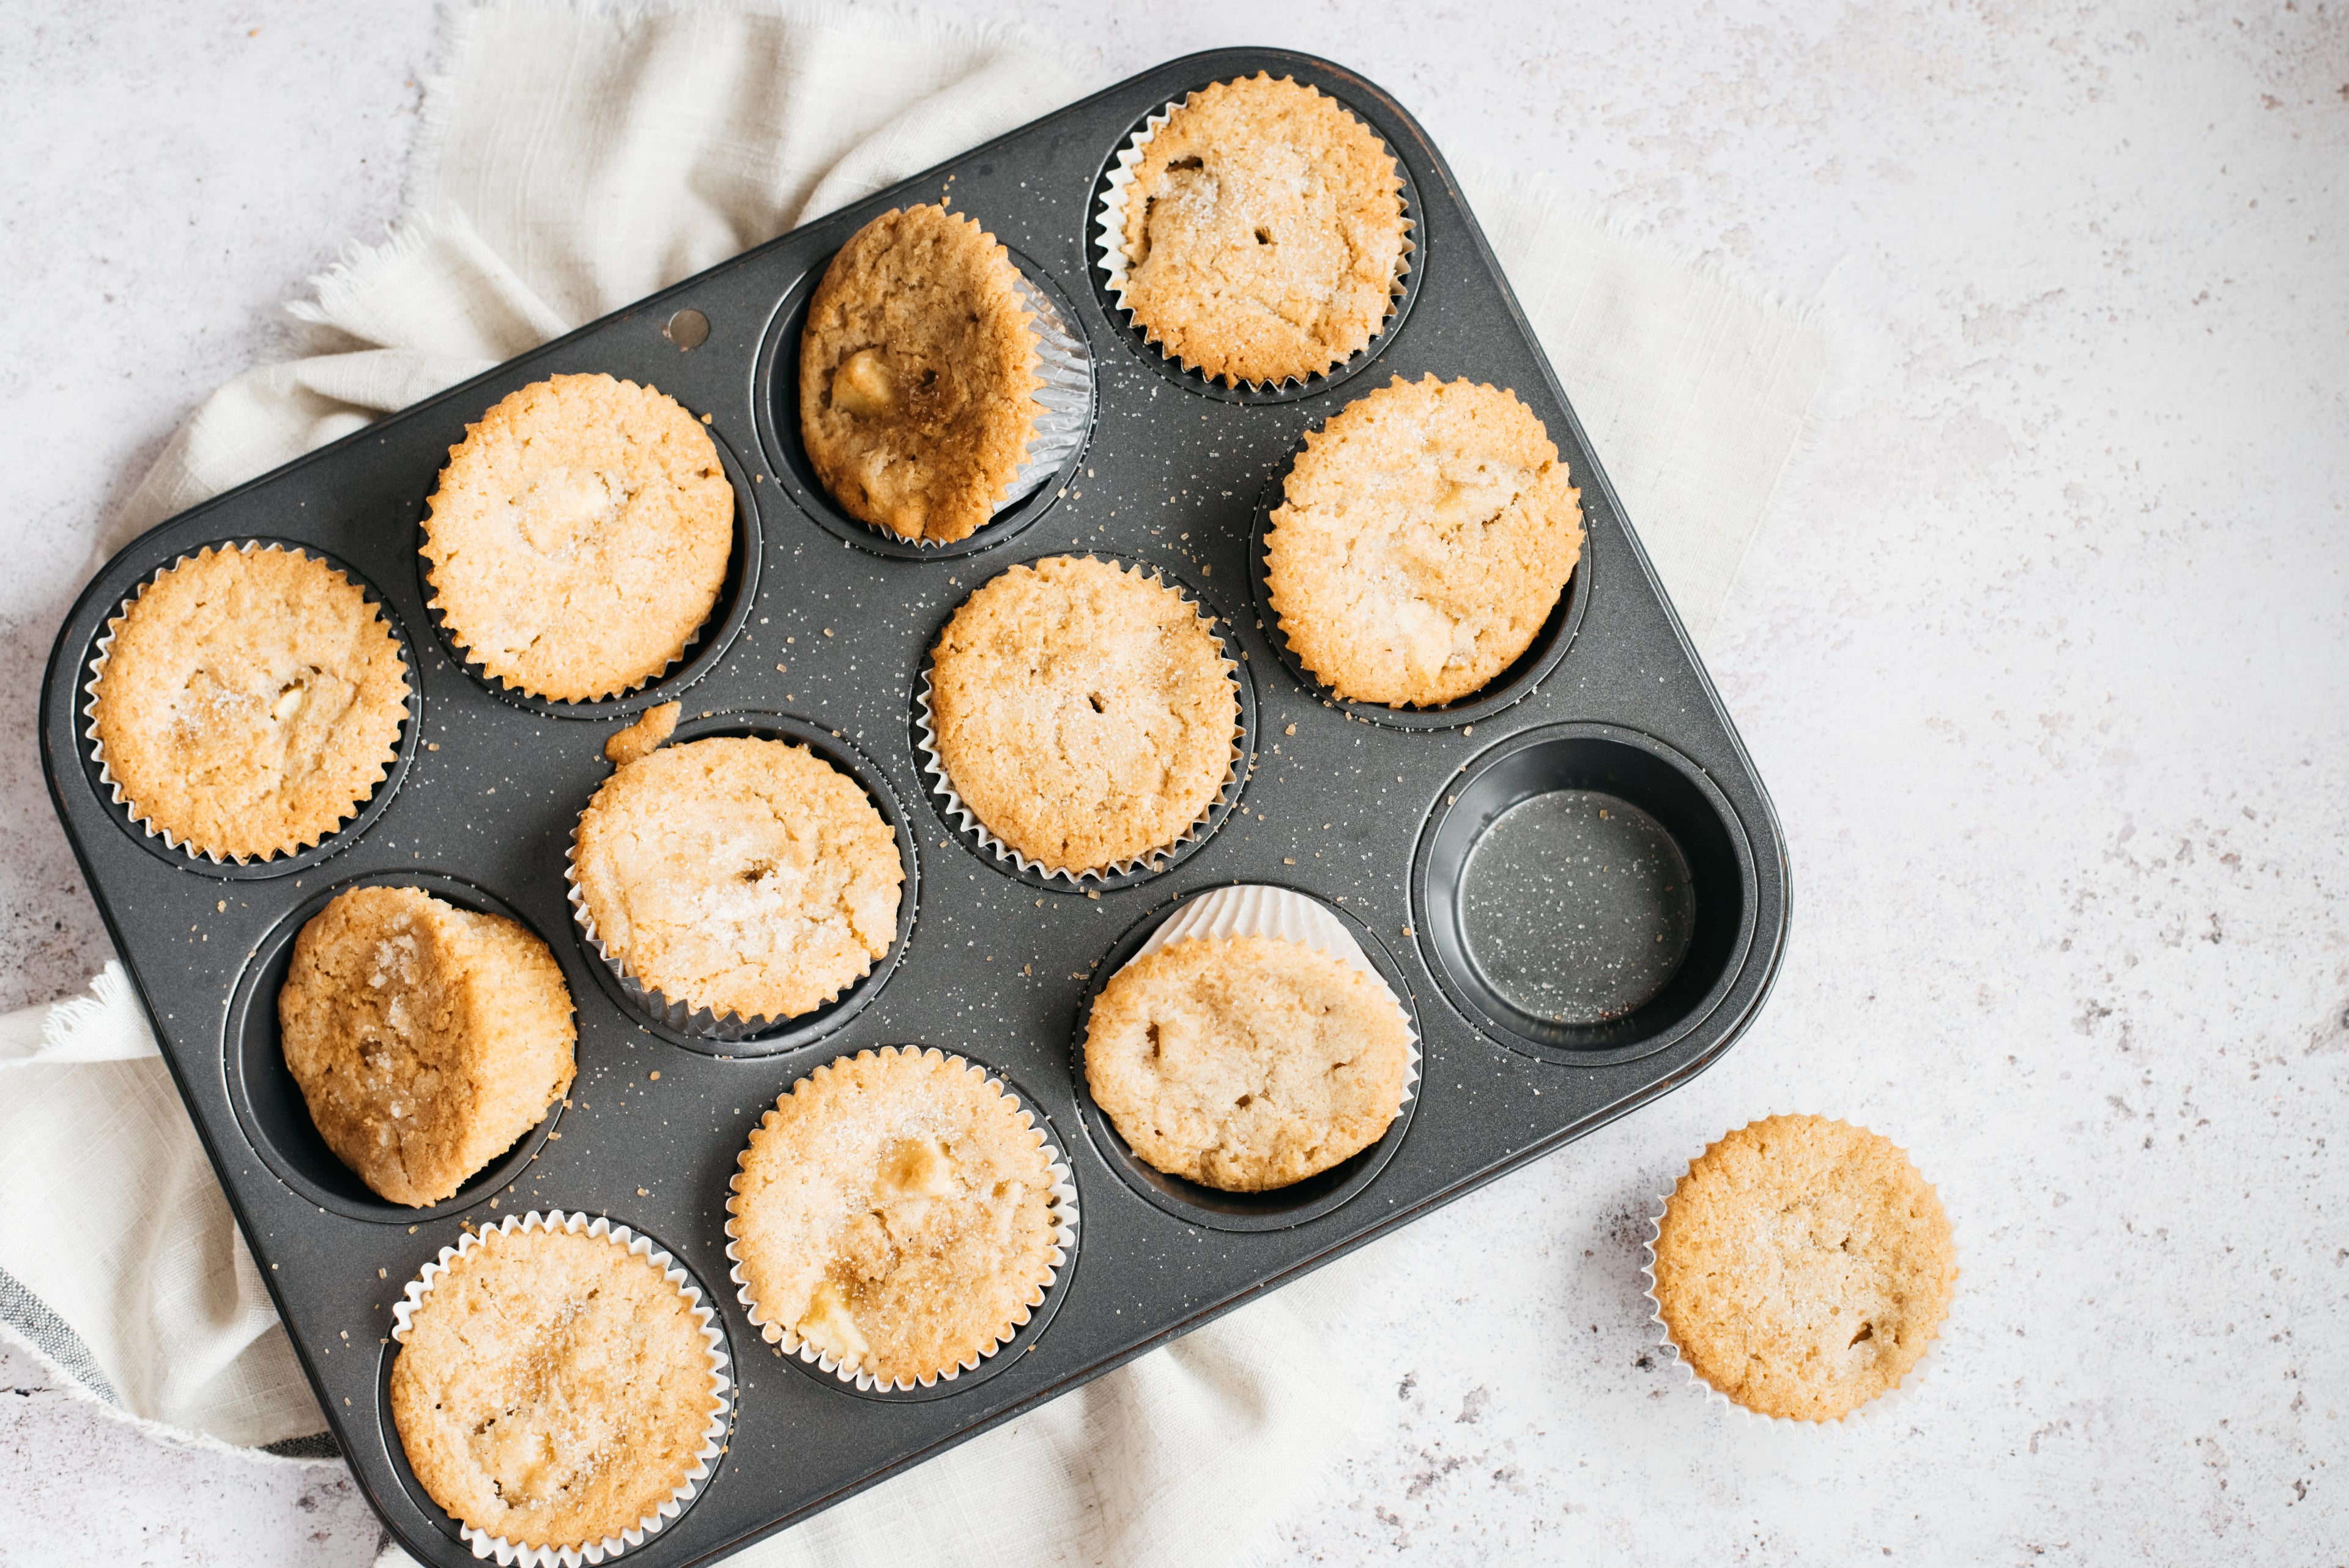 Muffins in a baking tray